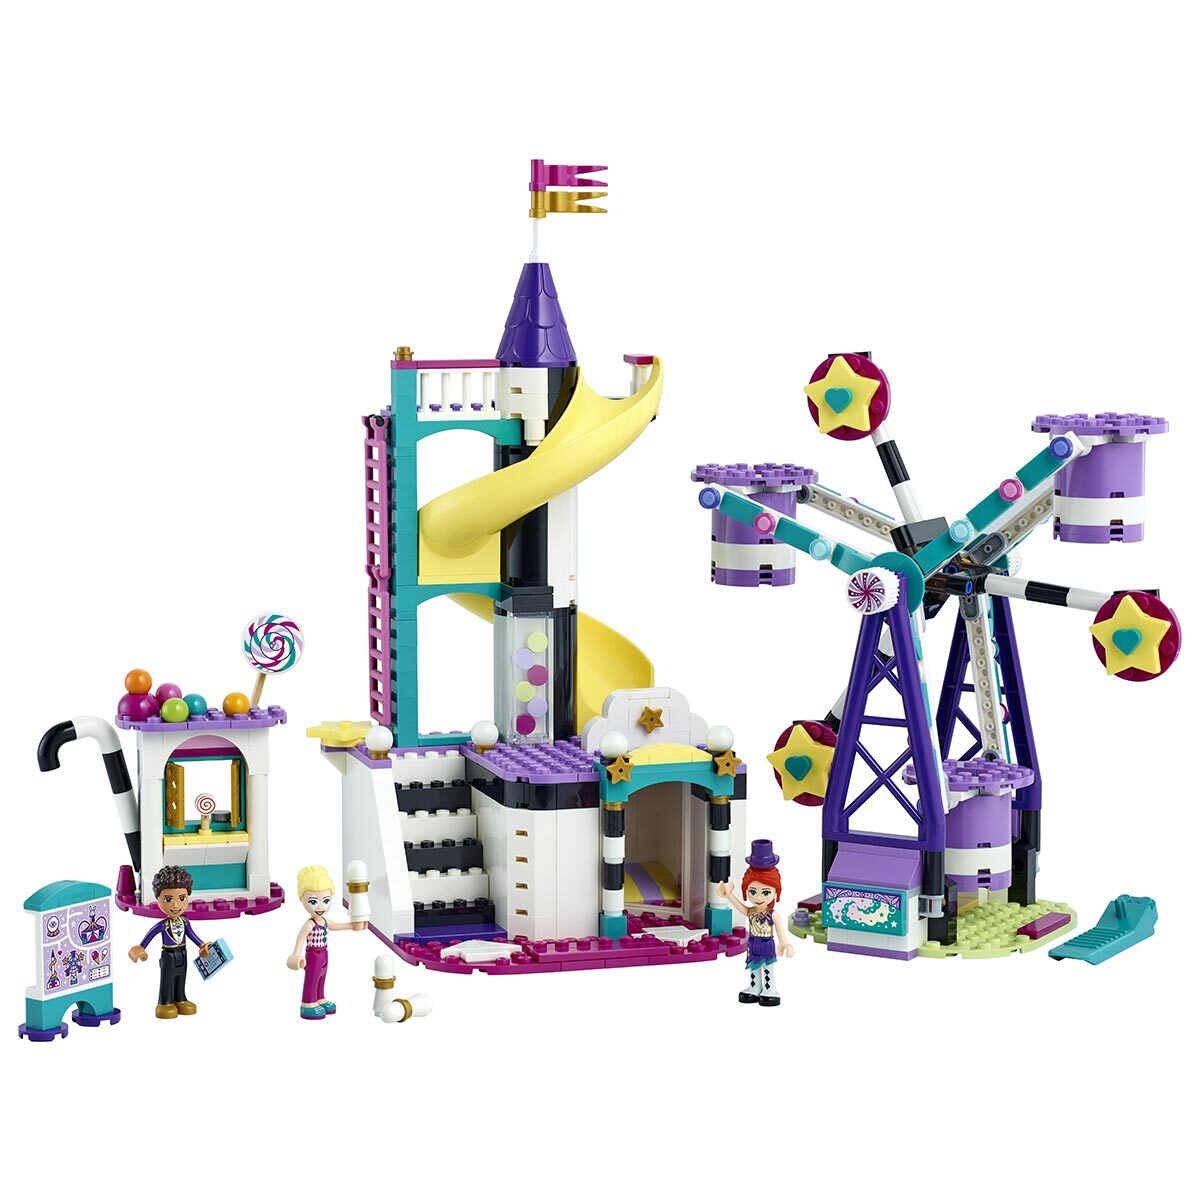 Buy LEGO Friends Magical Ferris Wheel & Slide Overview Image at costco.co.uk